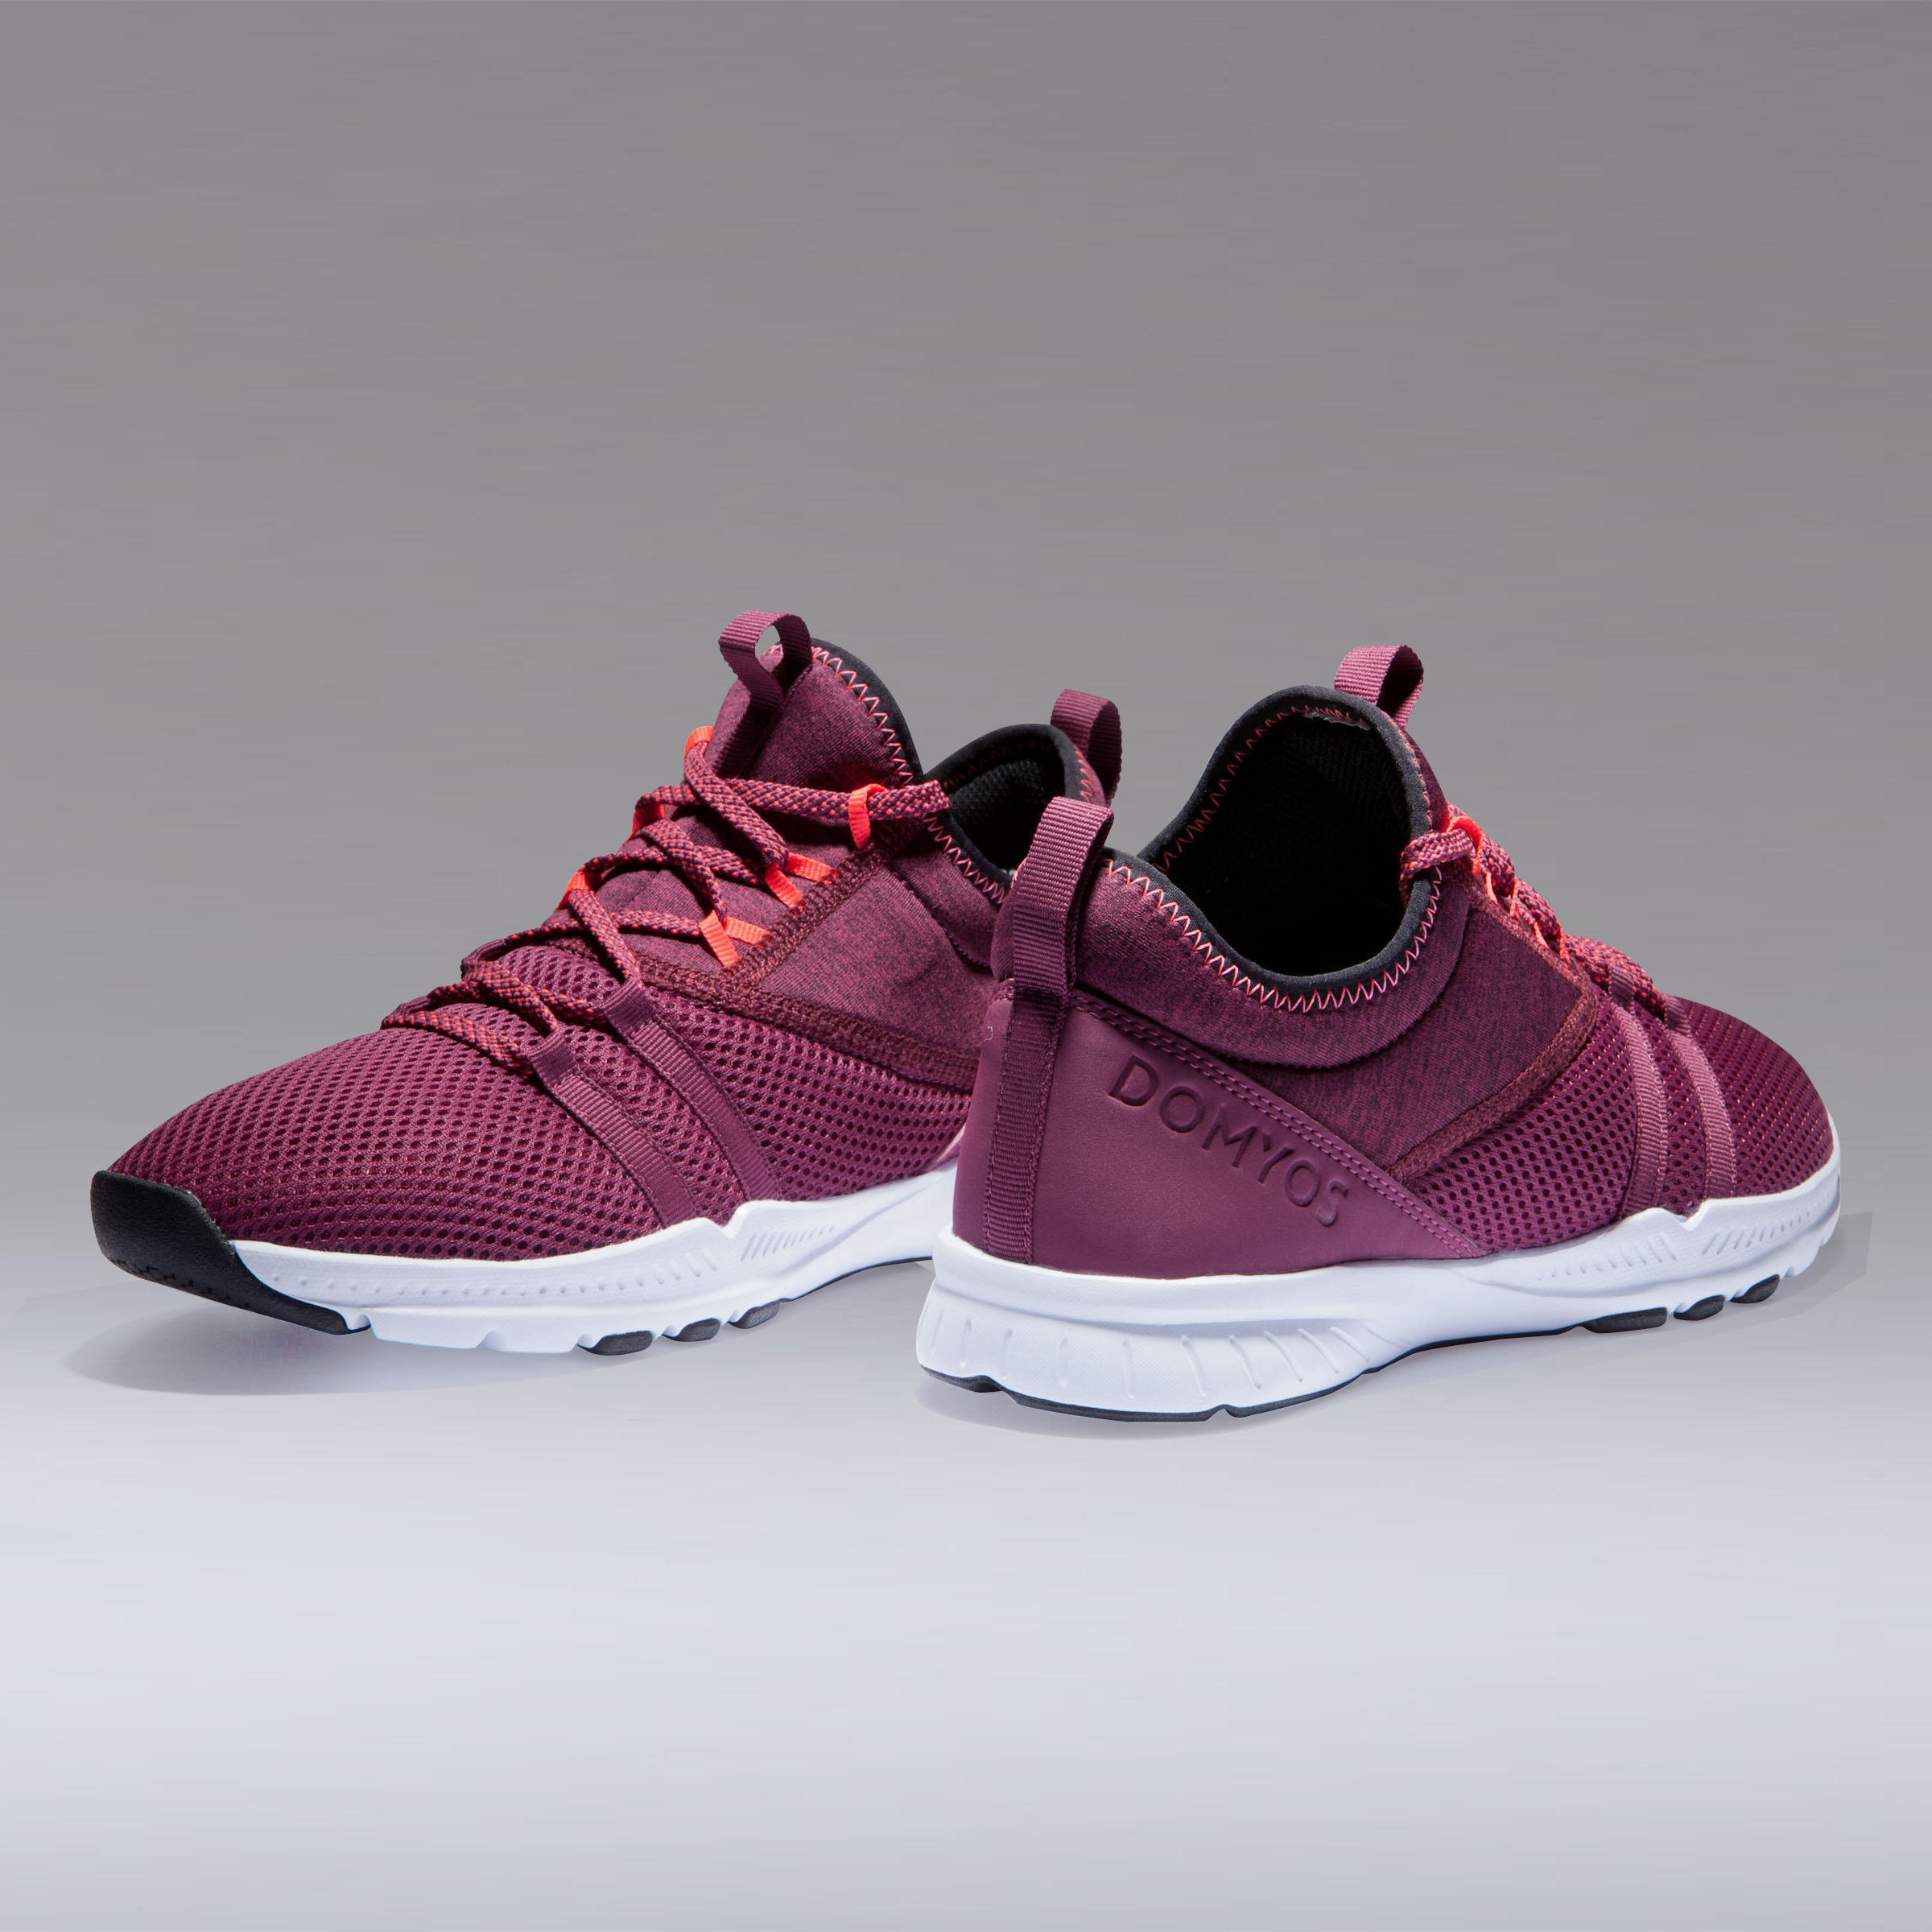 Women's Fitness Shoes 120 Mid - Burgundy 7/16